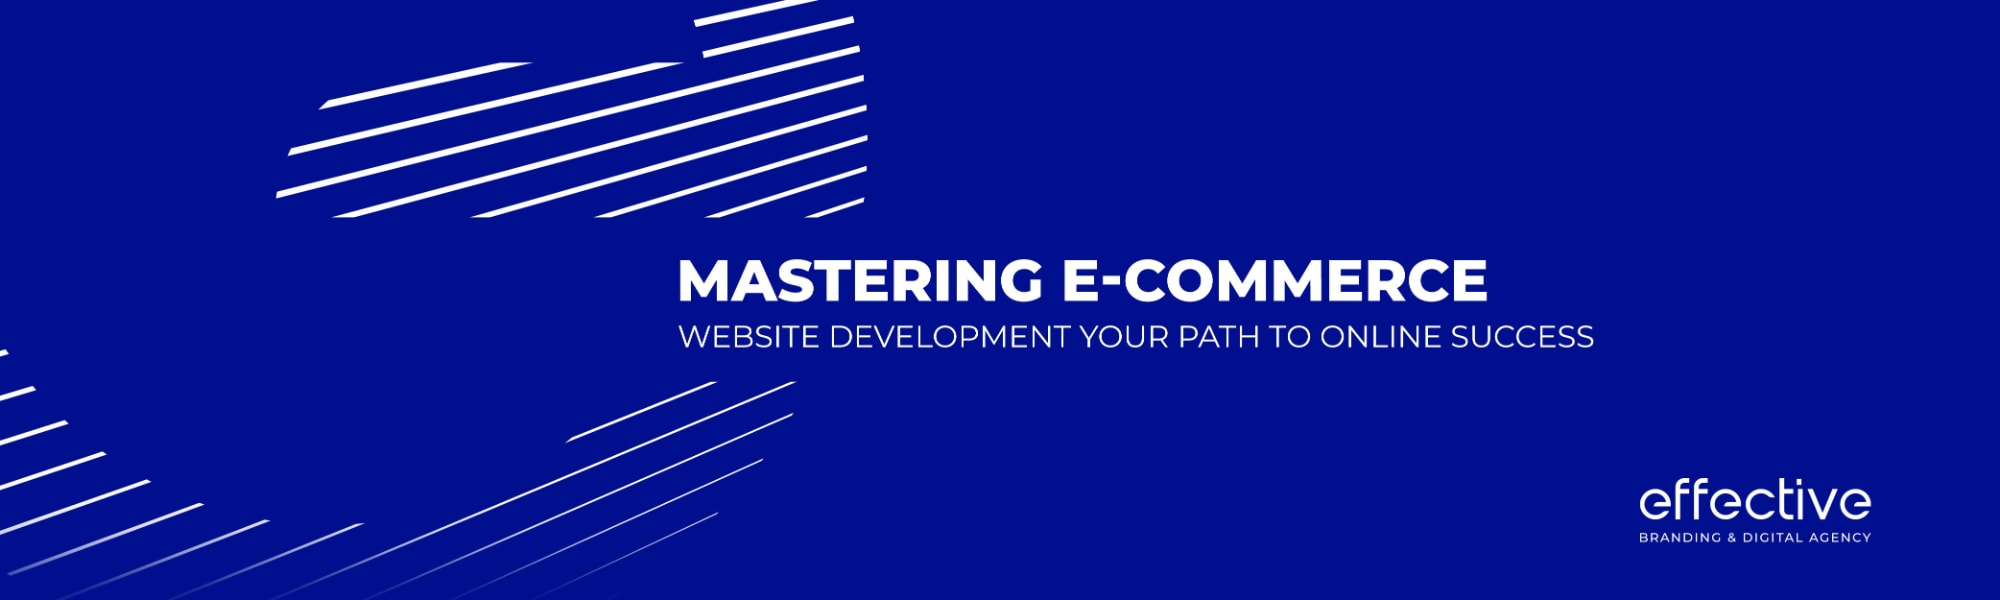 Mastering E-Commerce Website Development Your Path to Online Success